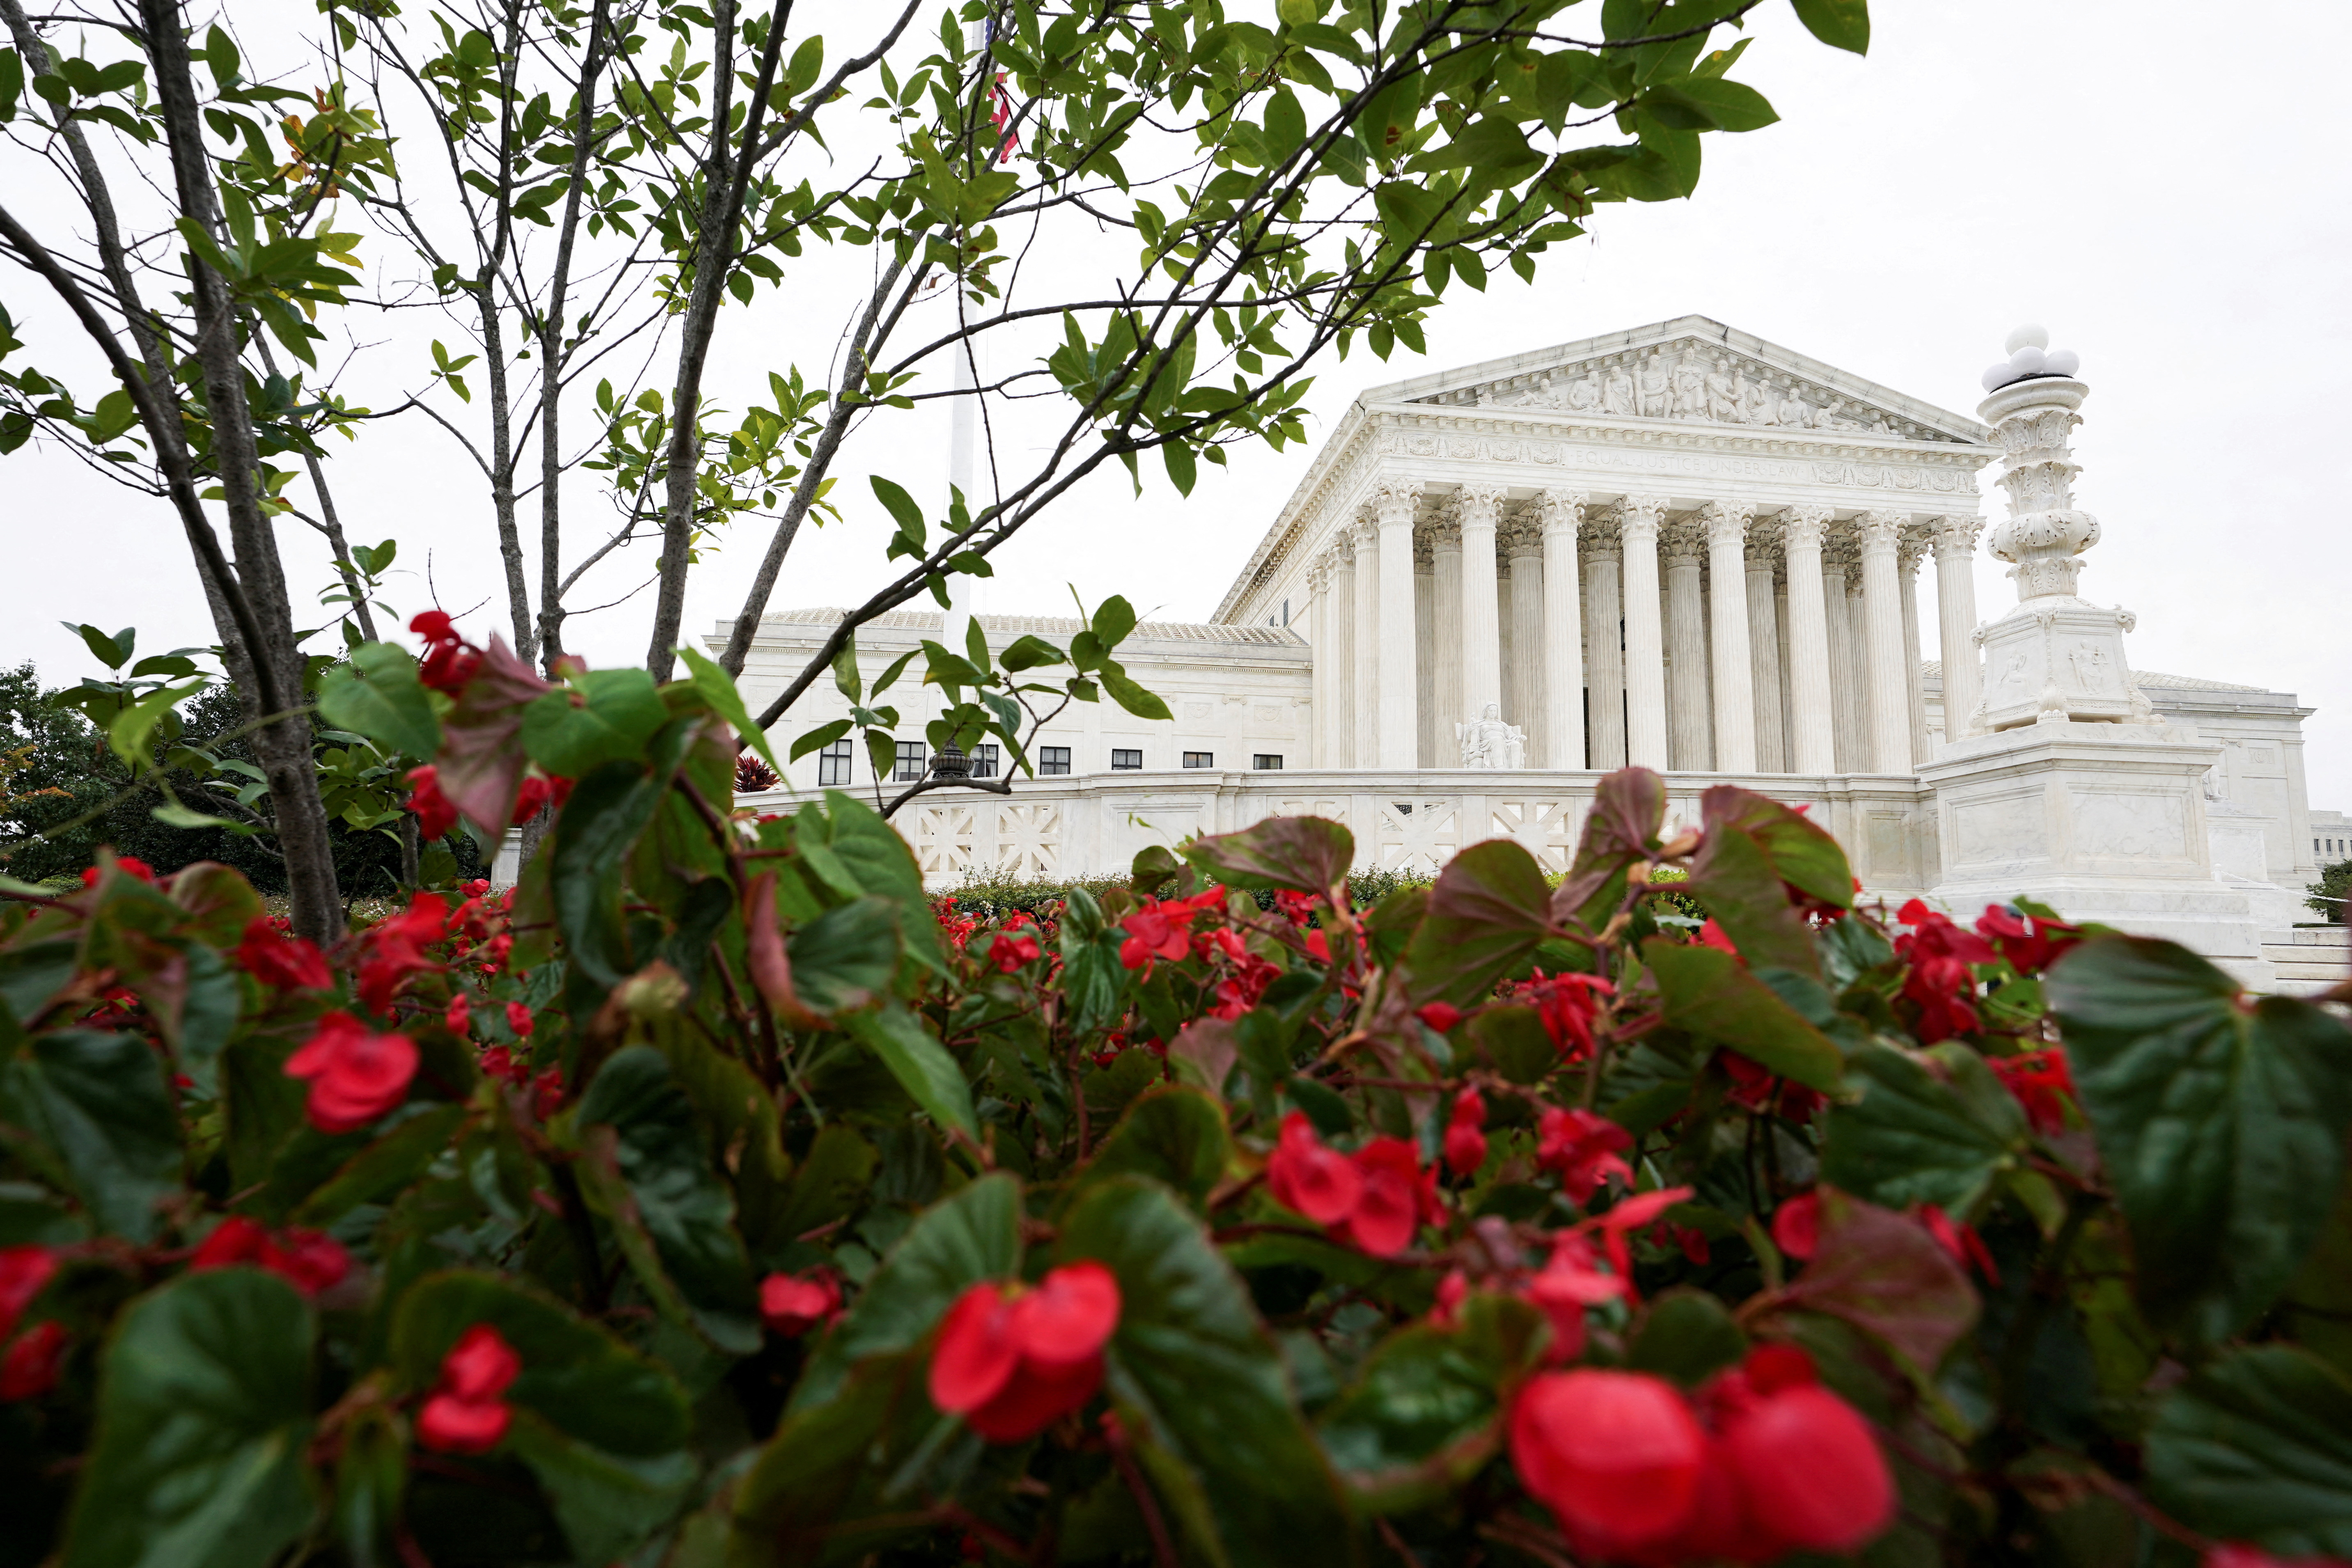 The U.S. Supreme Court building is seen in Washington